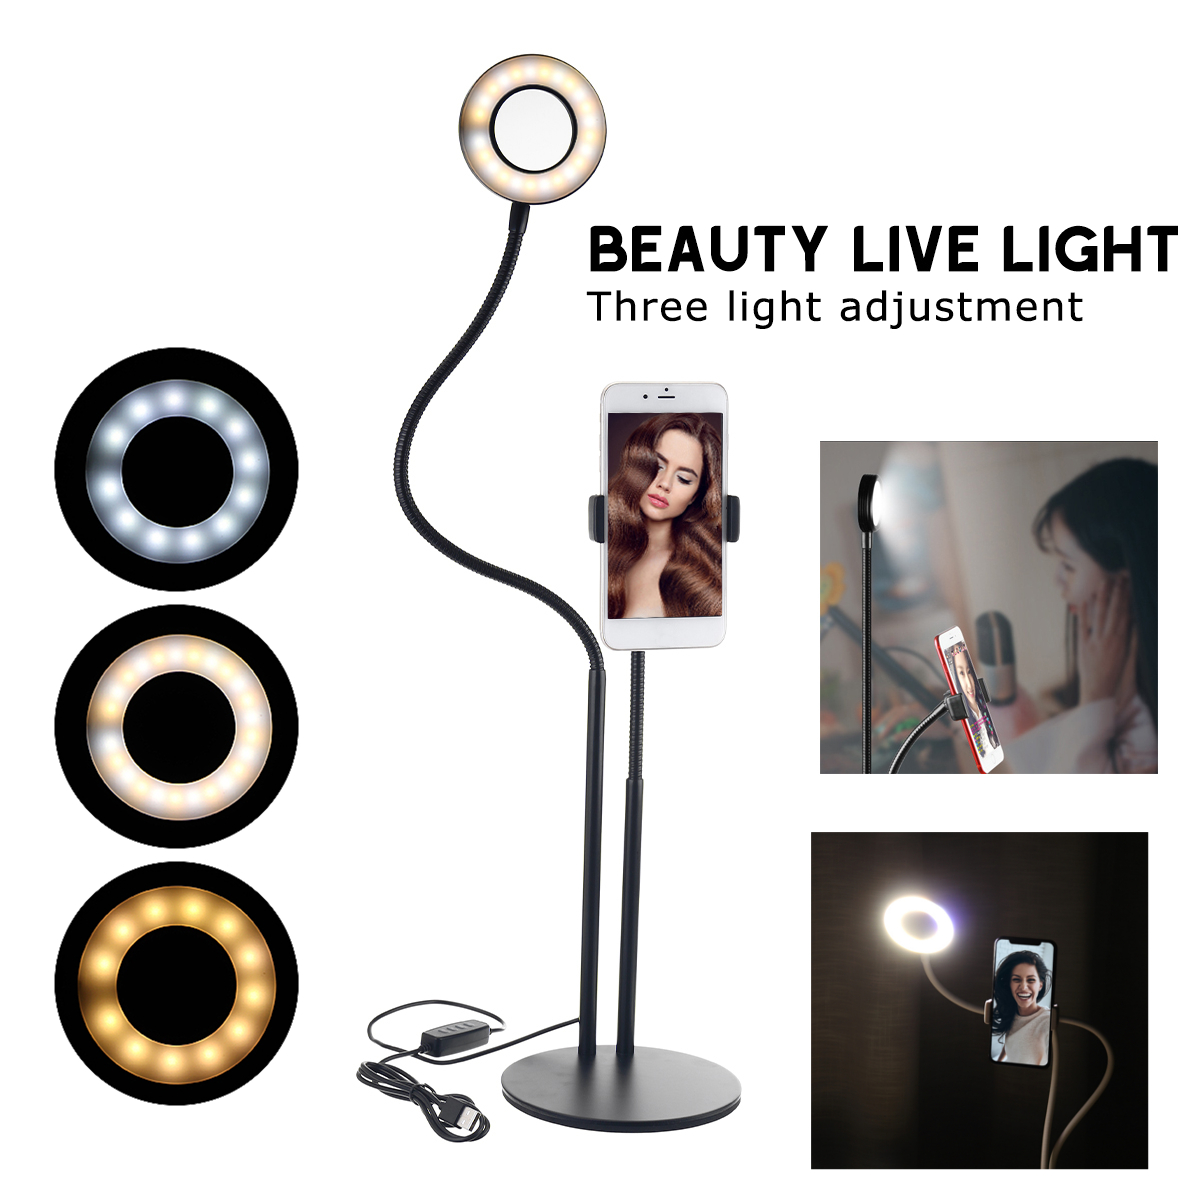 BX-02 Universal Selfie Ring Light Flexible Desk Lamp LED Fill Beauty Light 11 Brightness 3 Color Dimmable for Live Streaming Table Stand with Phone Clip for Youtube Tiktok